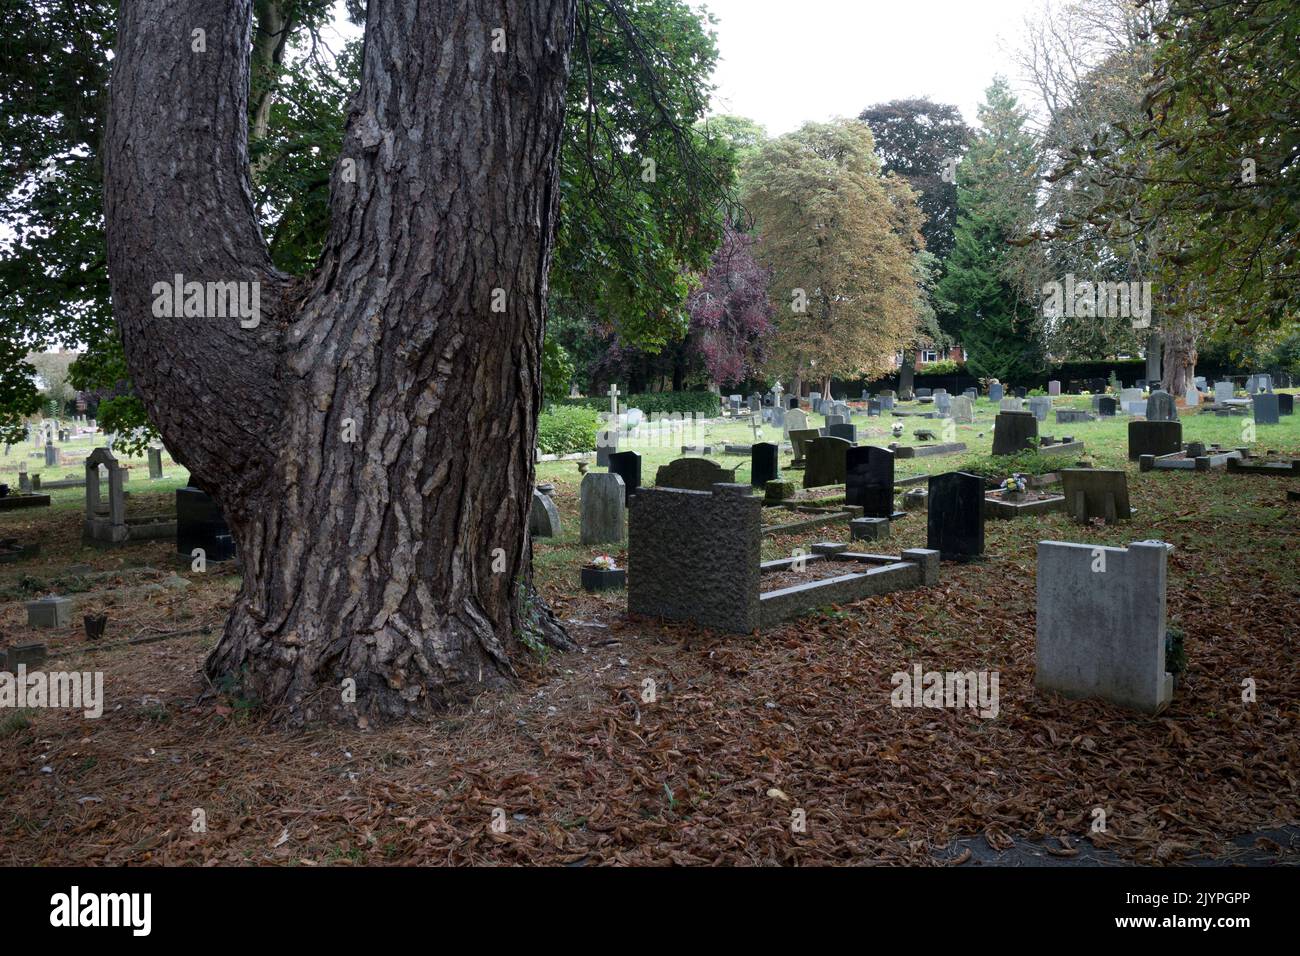 Oaks Road Cemetery, Kenilworth, Warwickshire, Angleterre, Royaume-Uni Banque D'Images